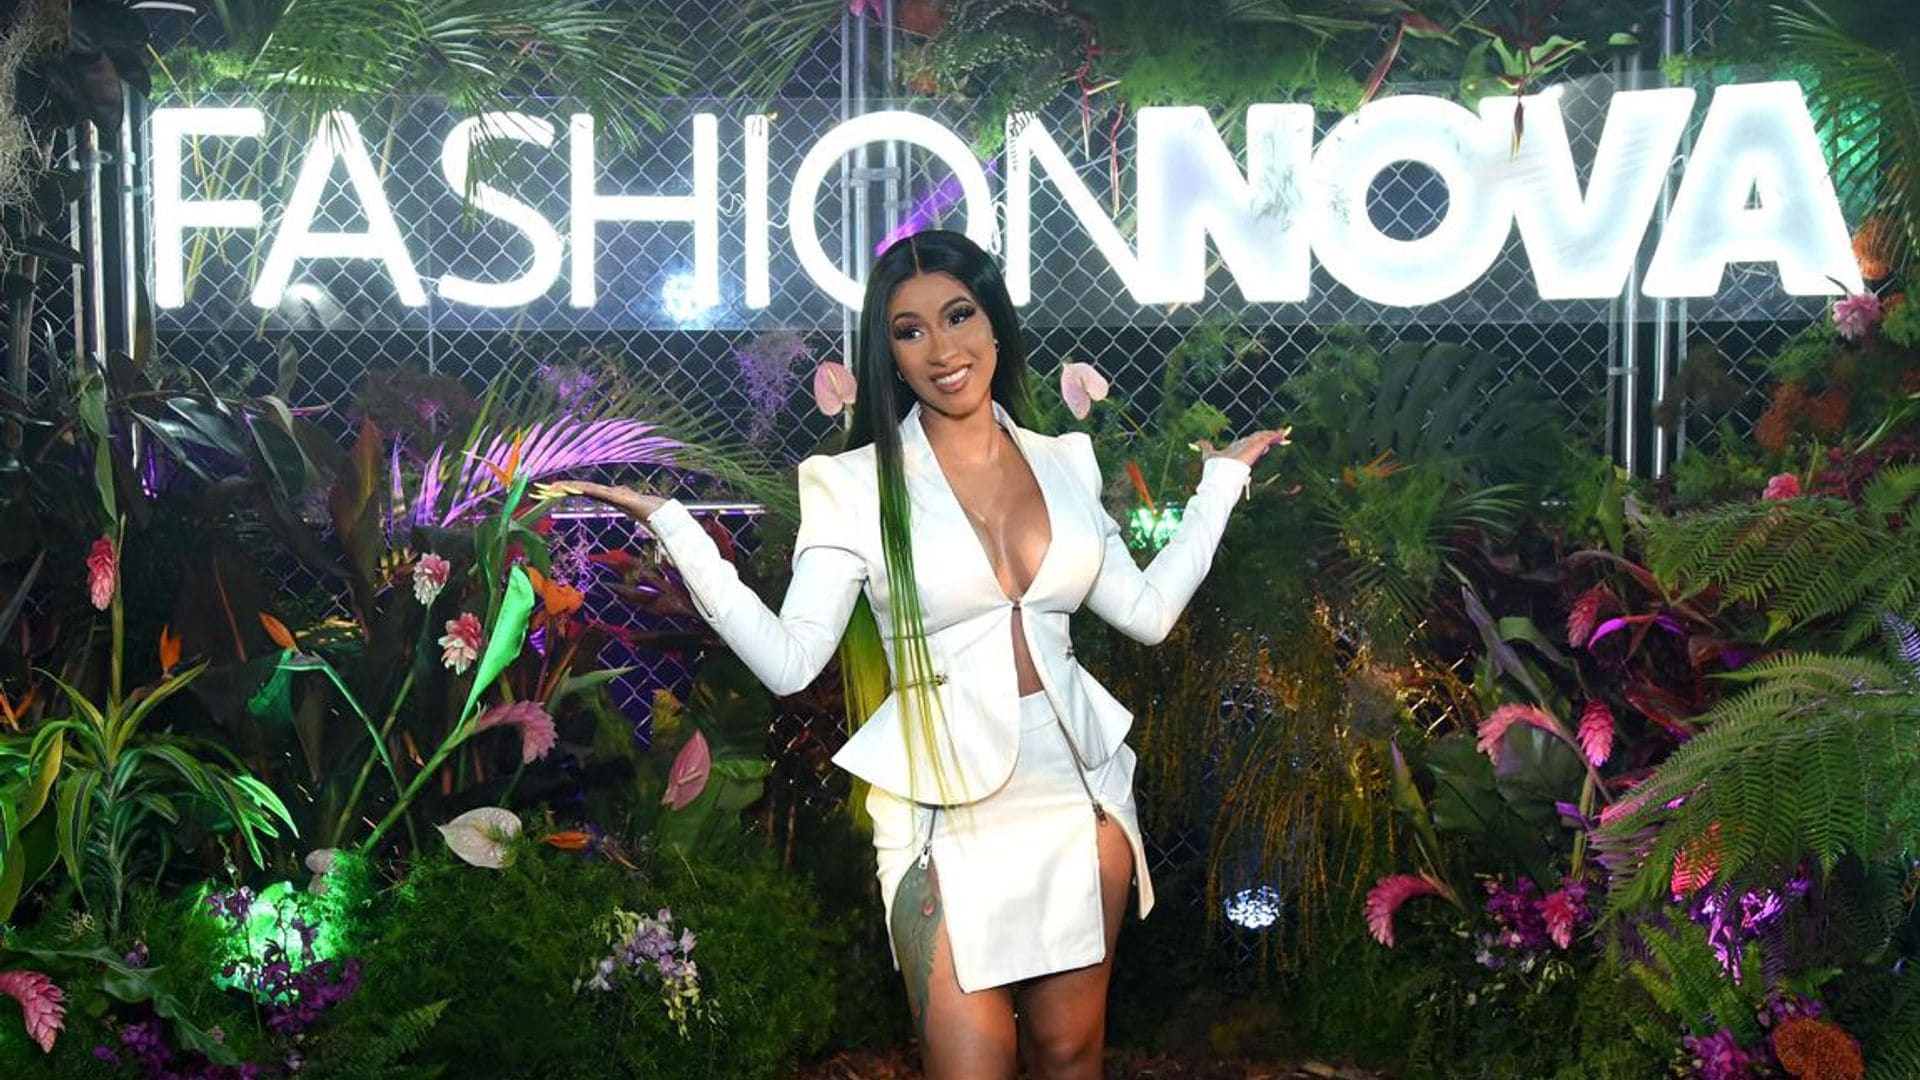 Cardi B is teaming up with Fashion Nova to give away 1K per hour to those affected by COVID-19